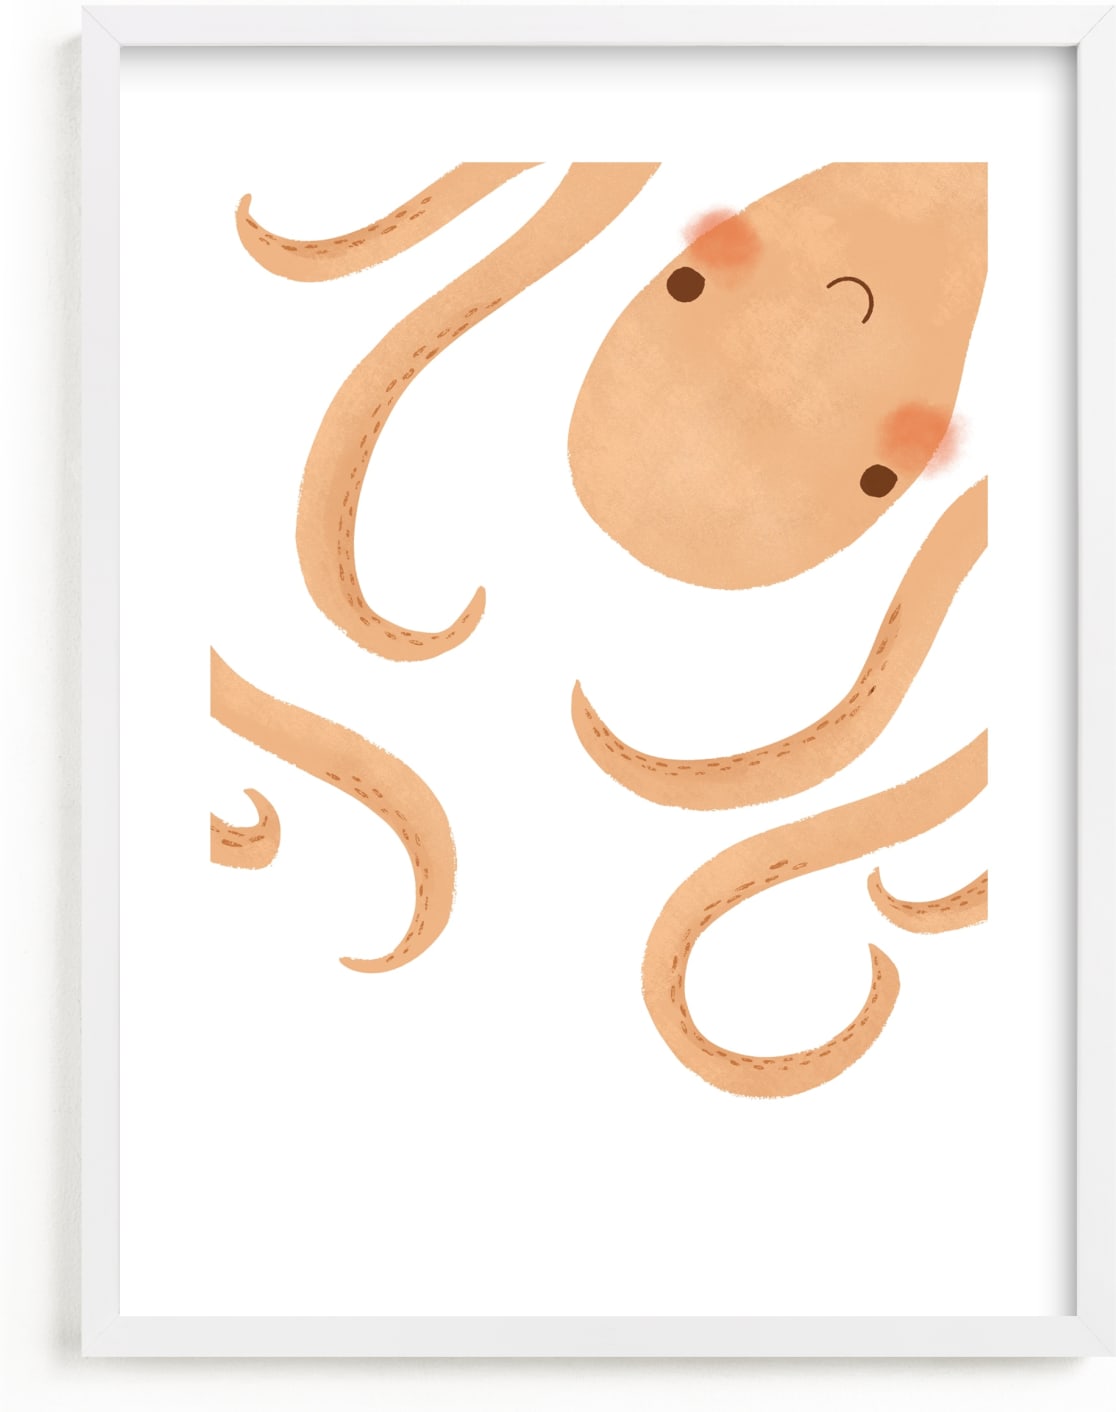 This is a orange art by Jackie Crawford called Little Septopus.